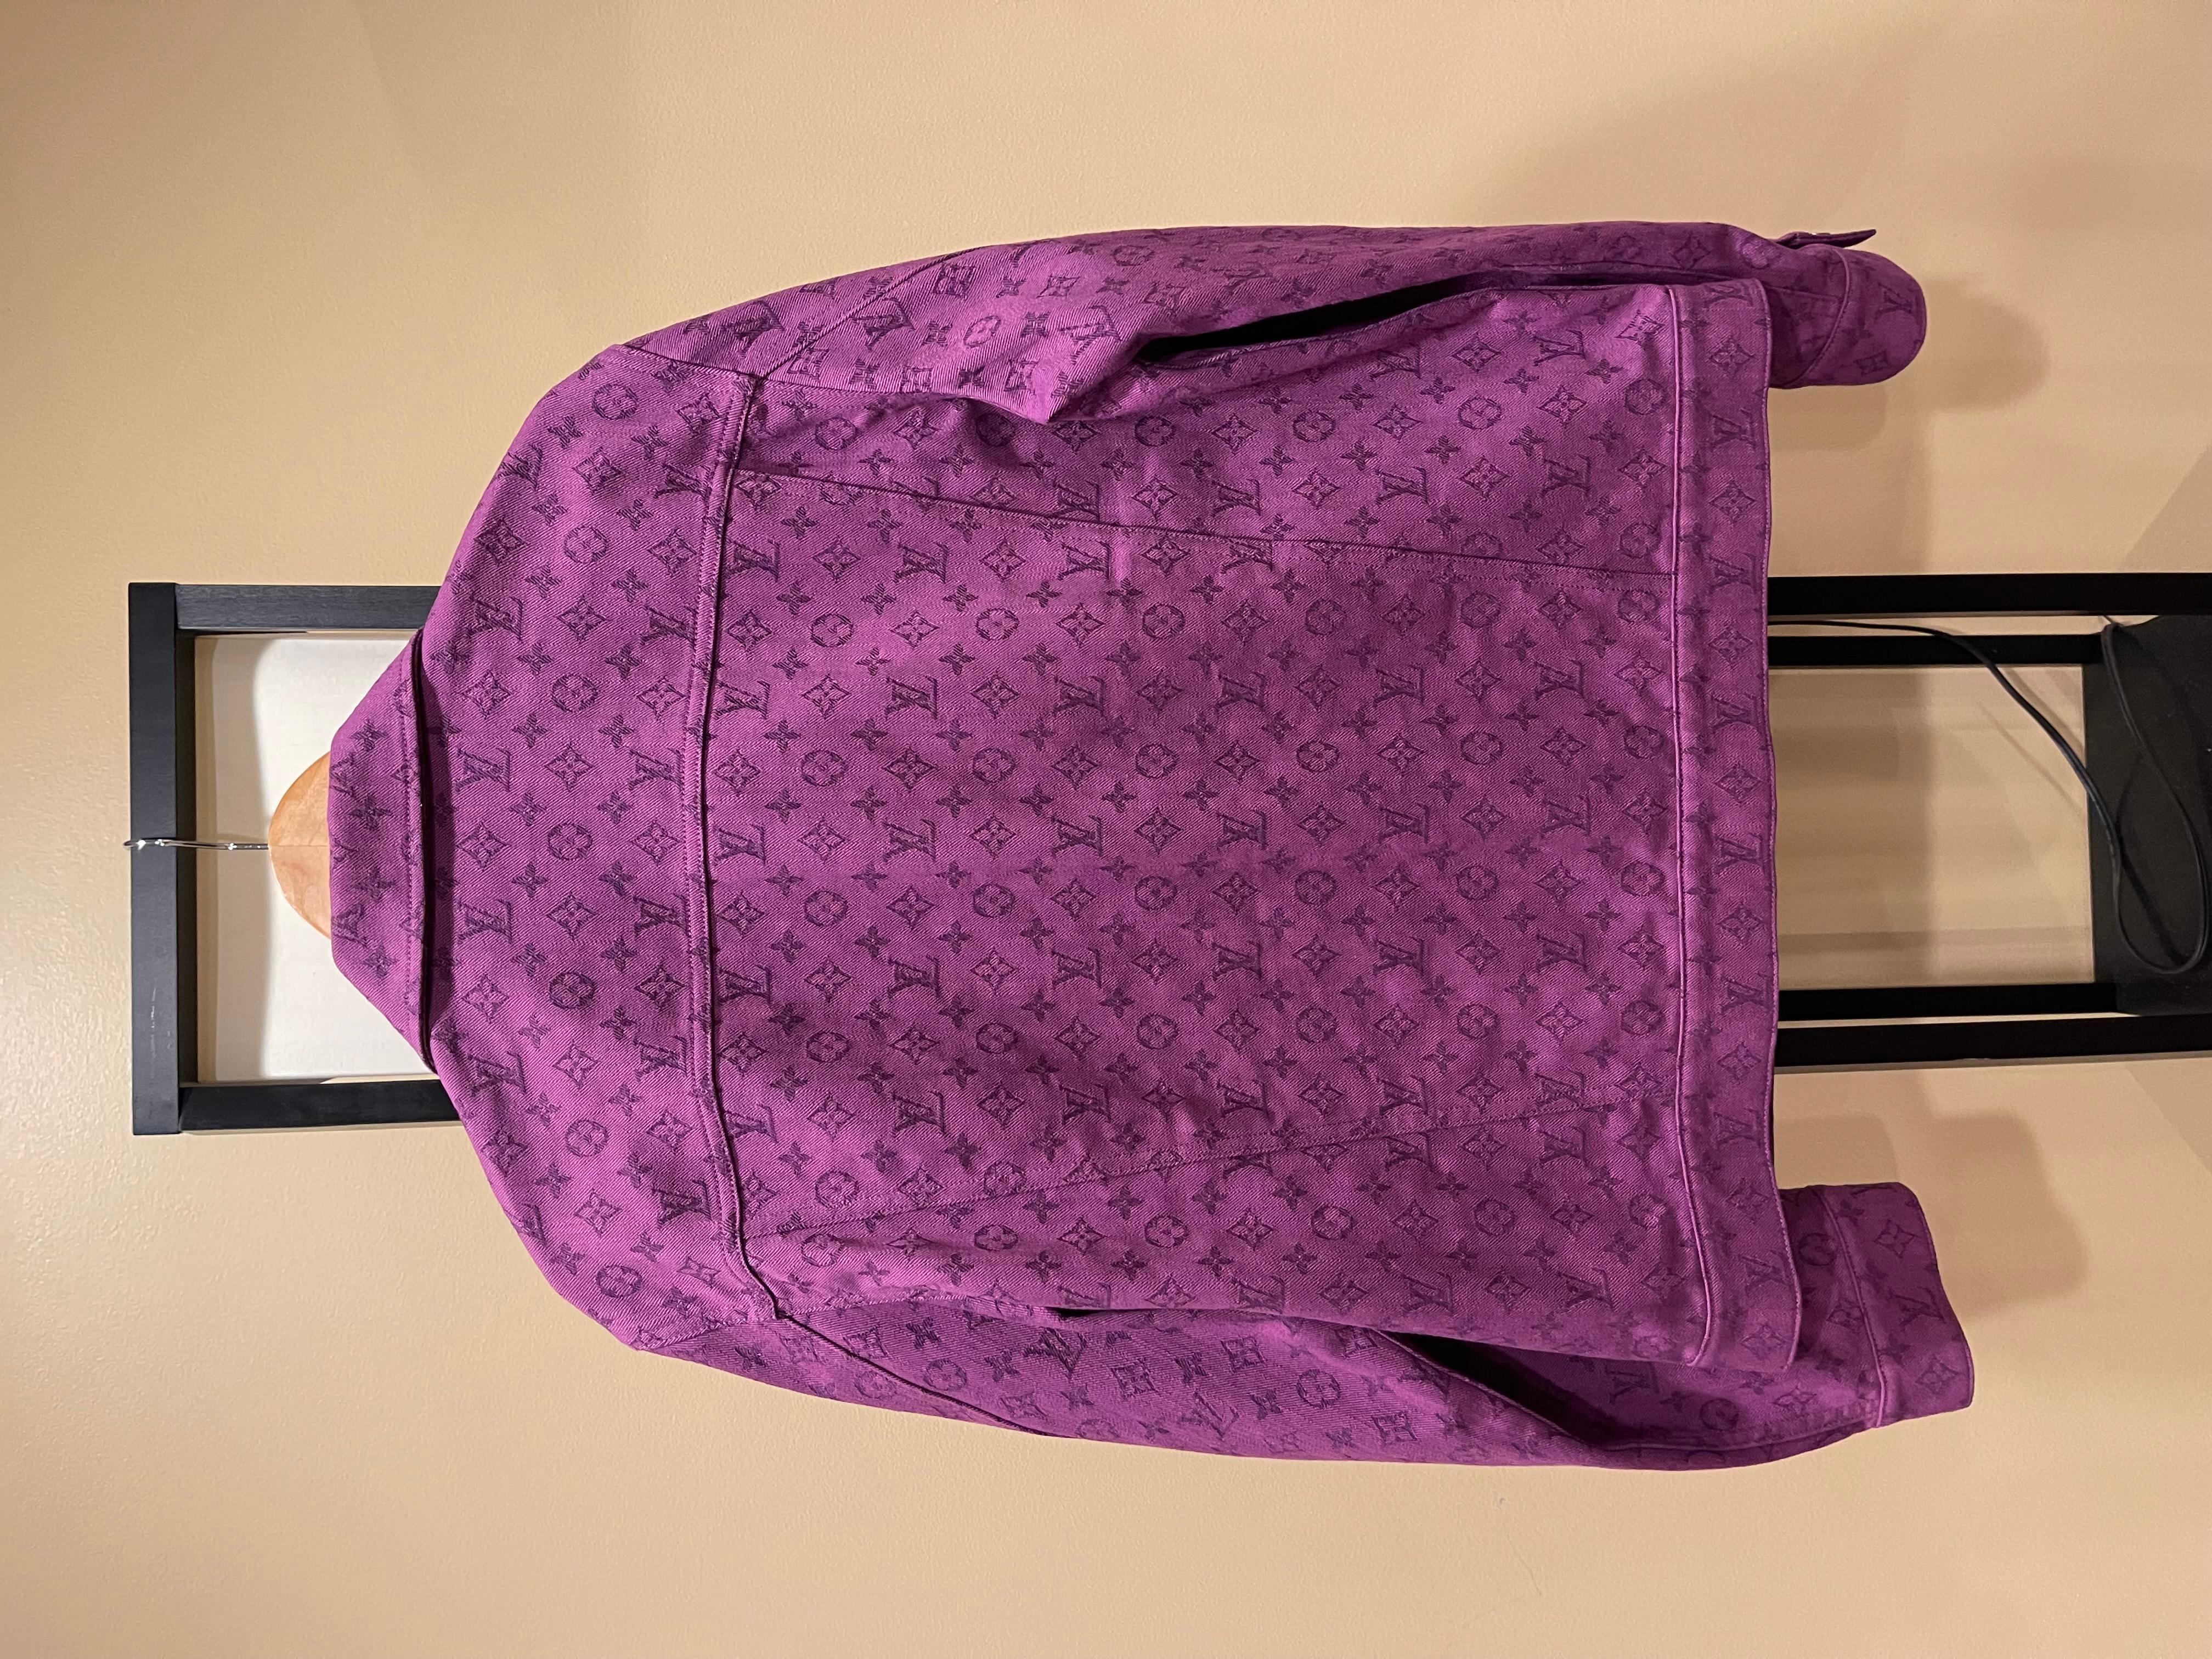 Louis Vuitton Purple Monogram Denim Jacket
Excellent condition (worn x2)
Size 52 (measurements are with the jacket buttoned up)
Pre-Fall 2019
Super exclusive piece. Very rare to find this for sale anywhere, especially in this sought after size.
Not